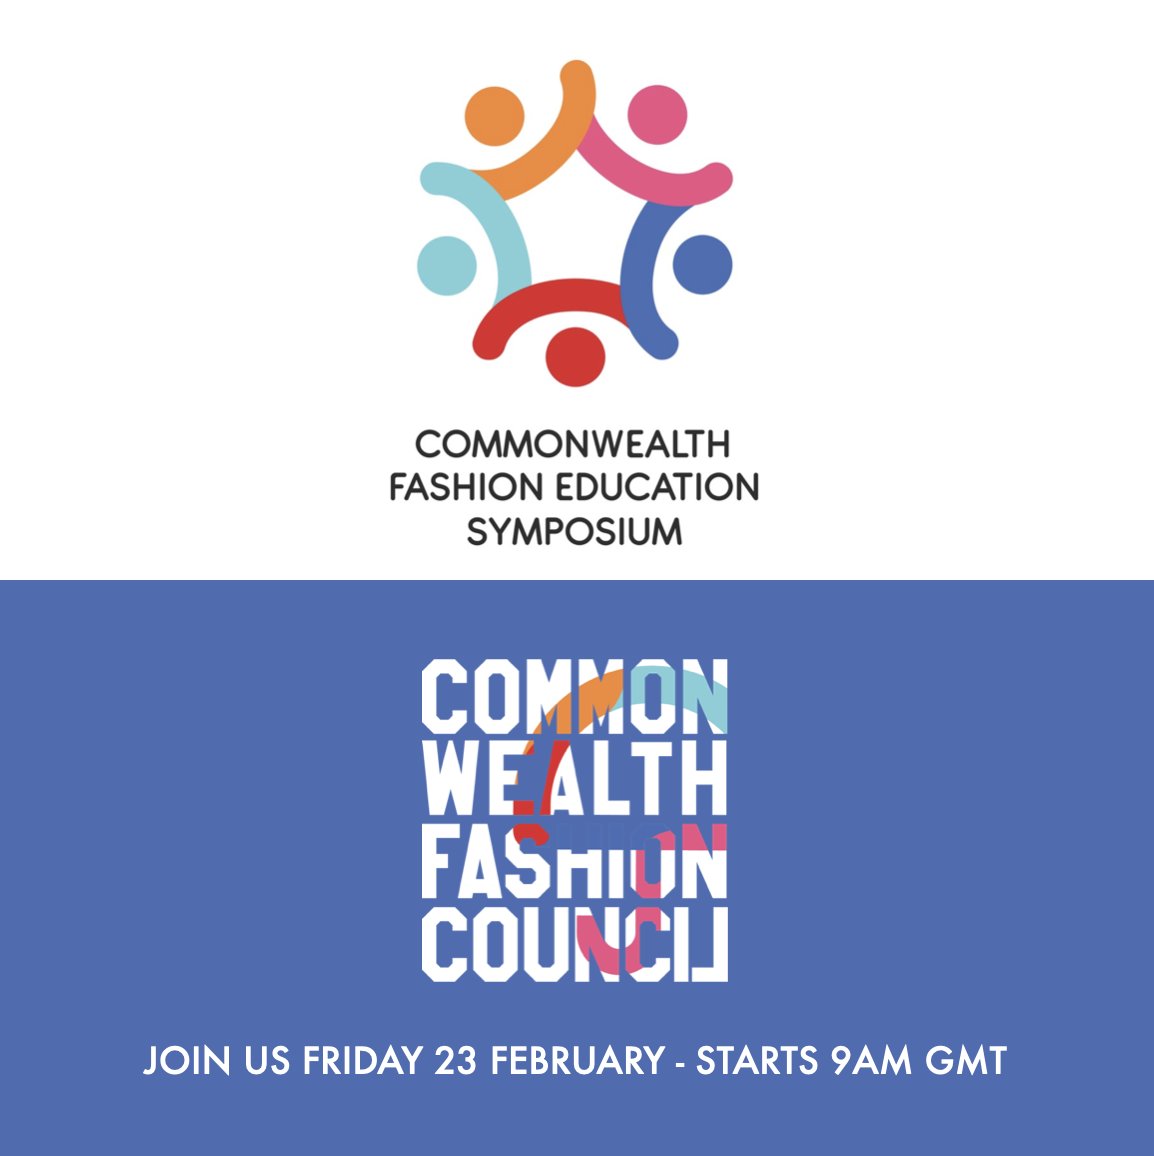 @commonwealthfashion invites you join the Commonwealth Fashion Education Symposium from 9am GMT Friday 23 February on the GEN UK HUB. Themes: #Agitation #Innovation #Intersectionality Register free worldlabs.org/event/commonwe… #fashion #creative #culture #education #design #future